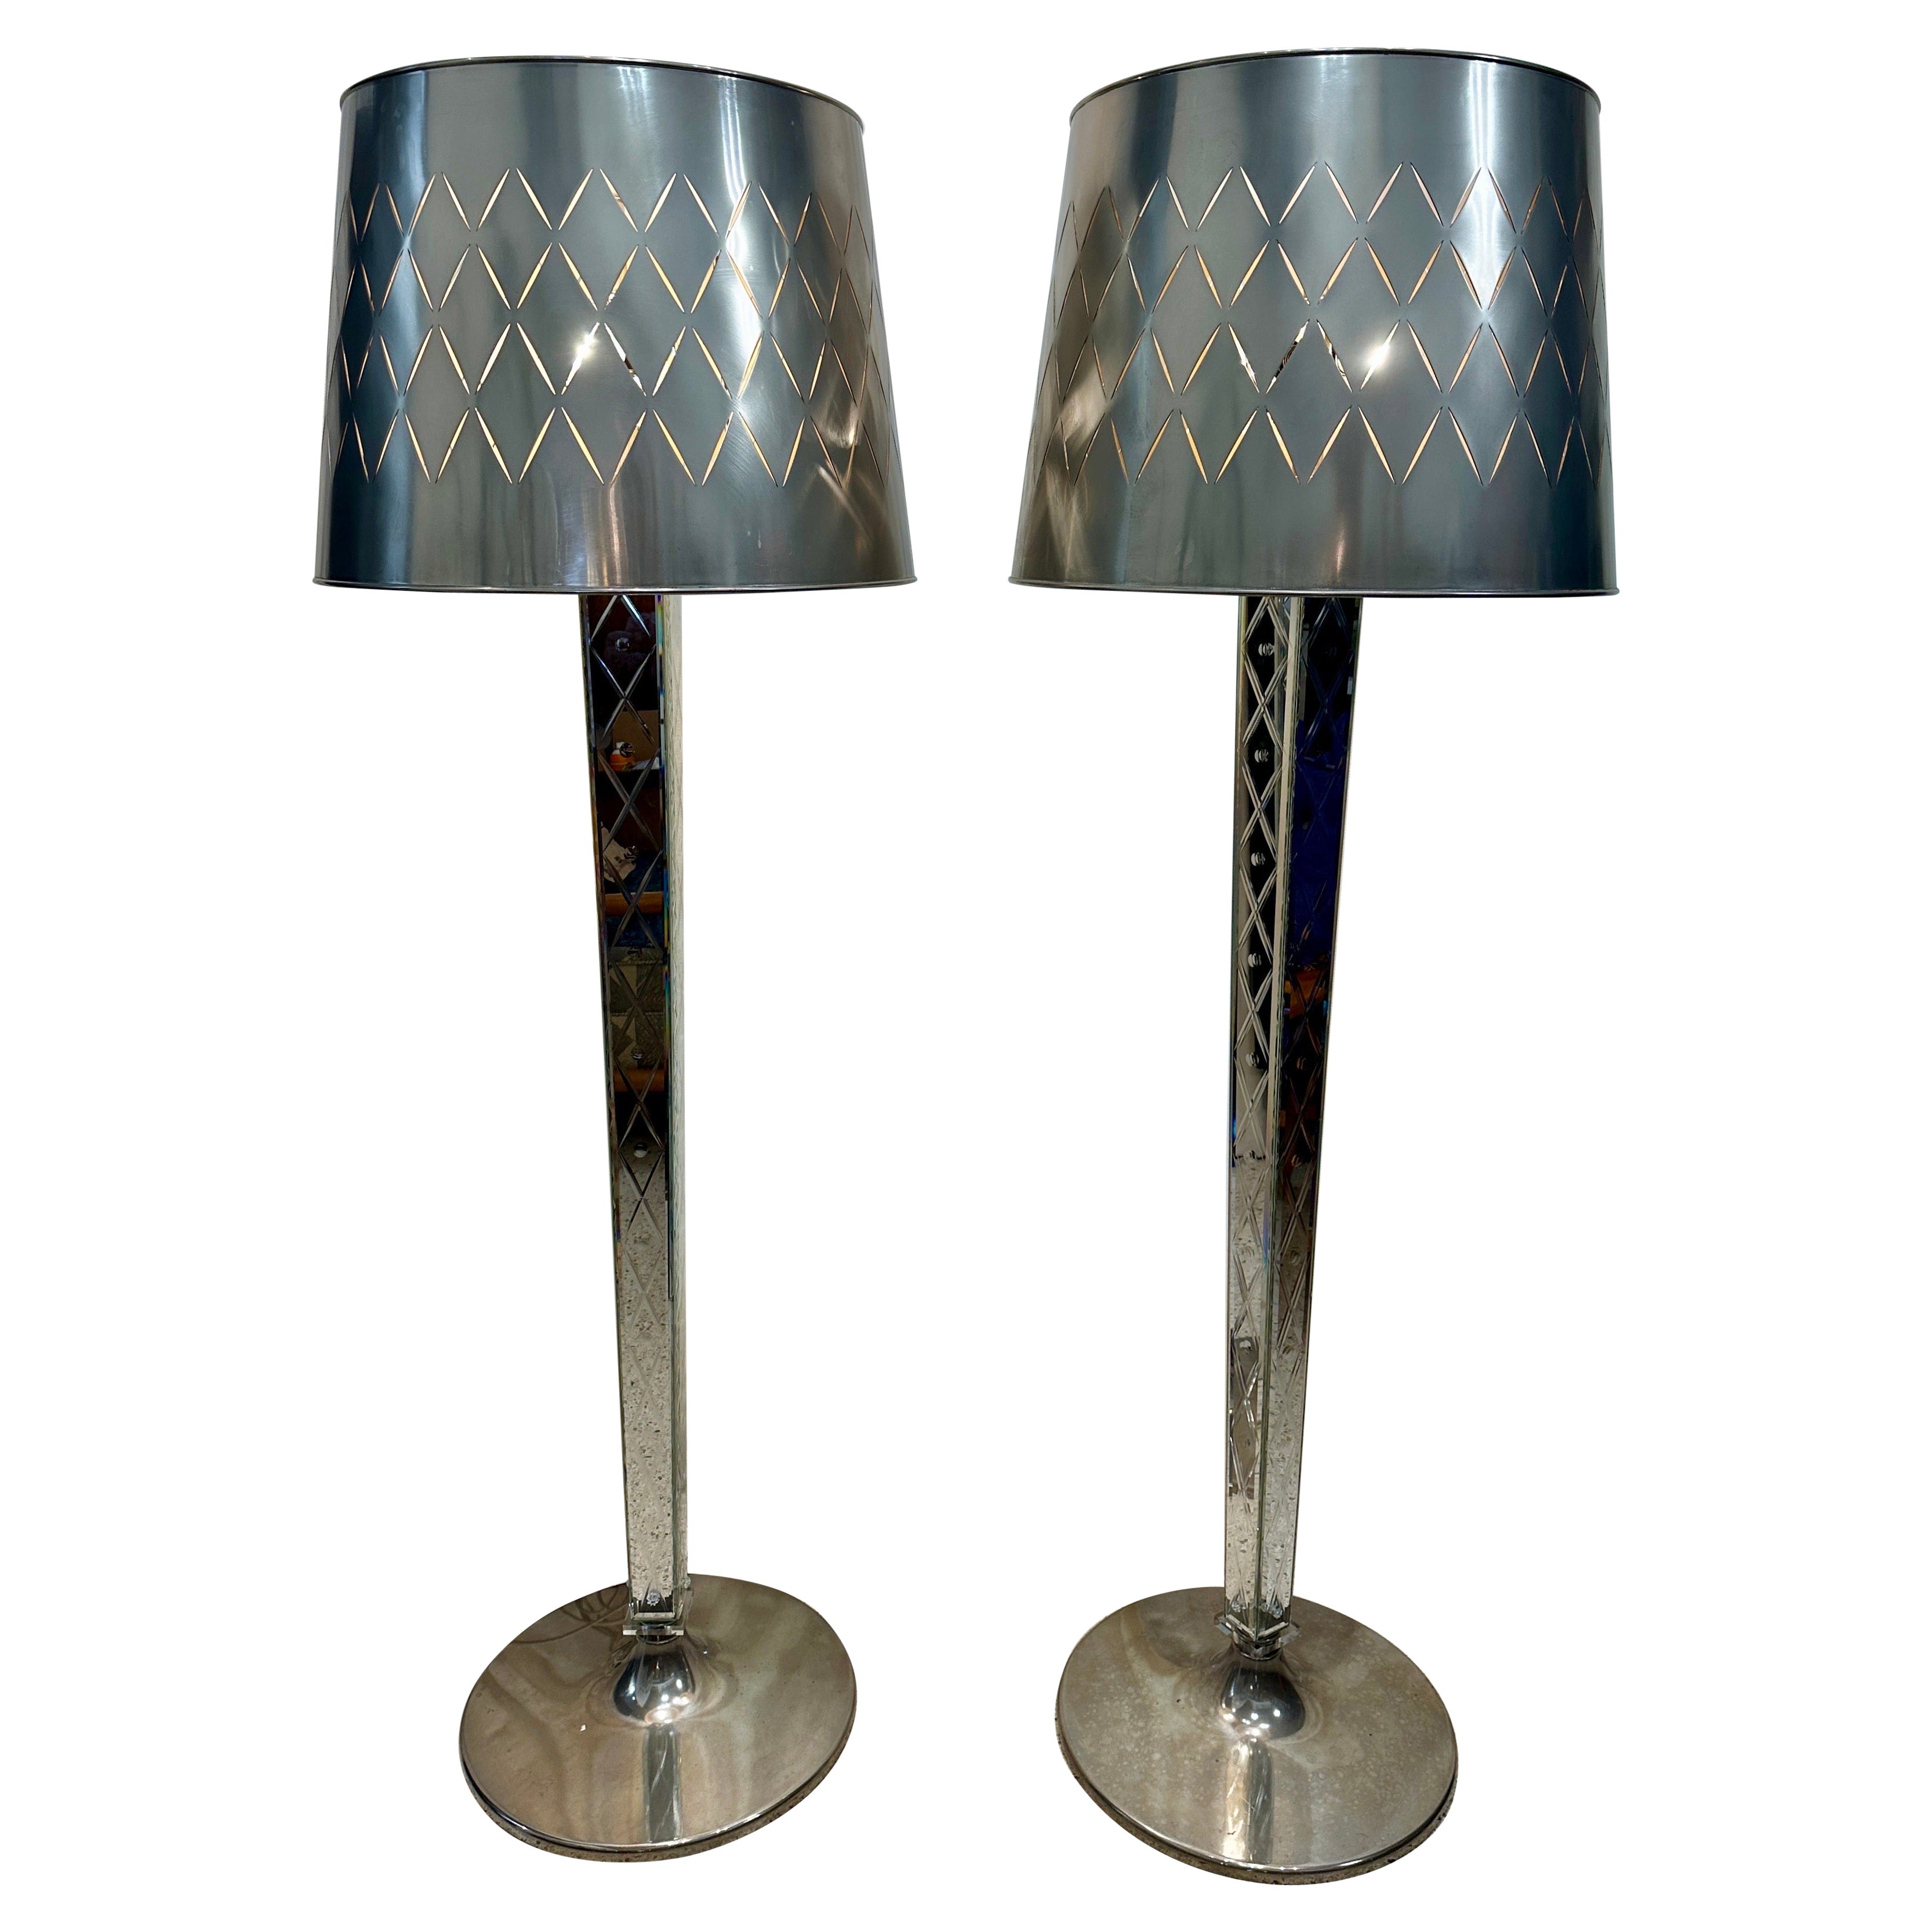 RARE Pair of Philippe Starck Mirror Floor-Lamps - Delano Hotel South Beach For Sale